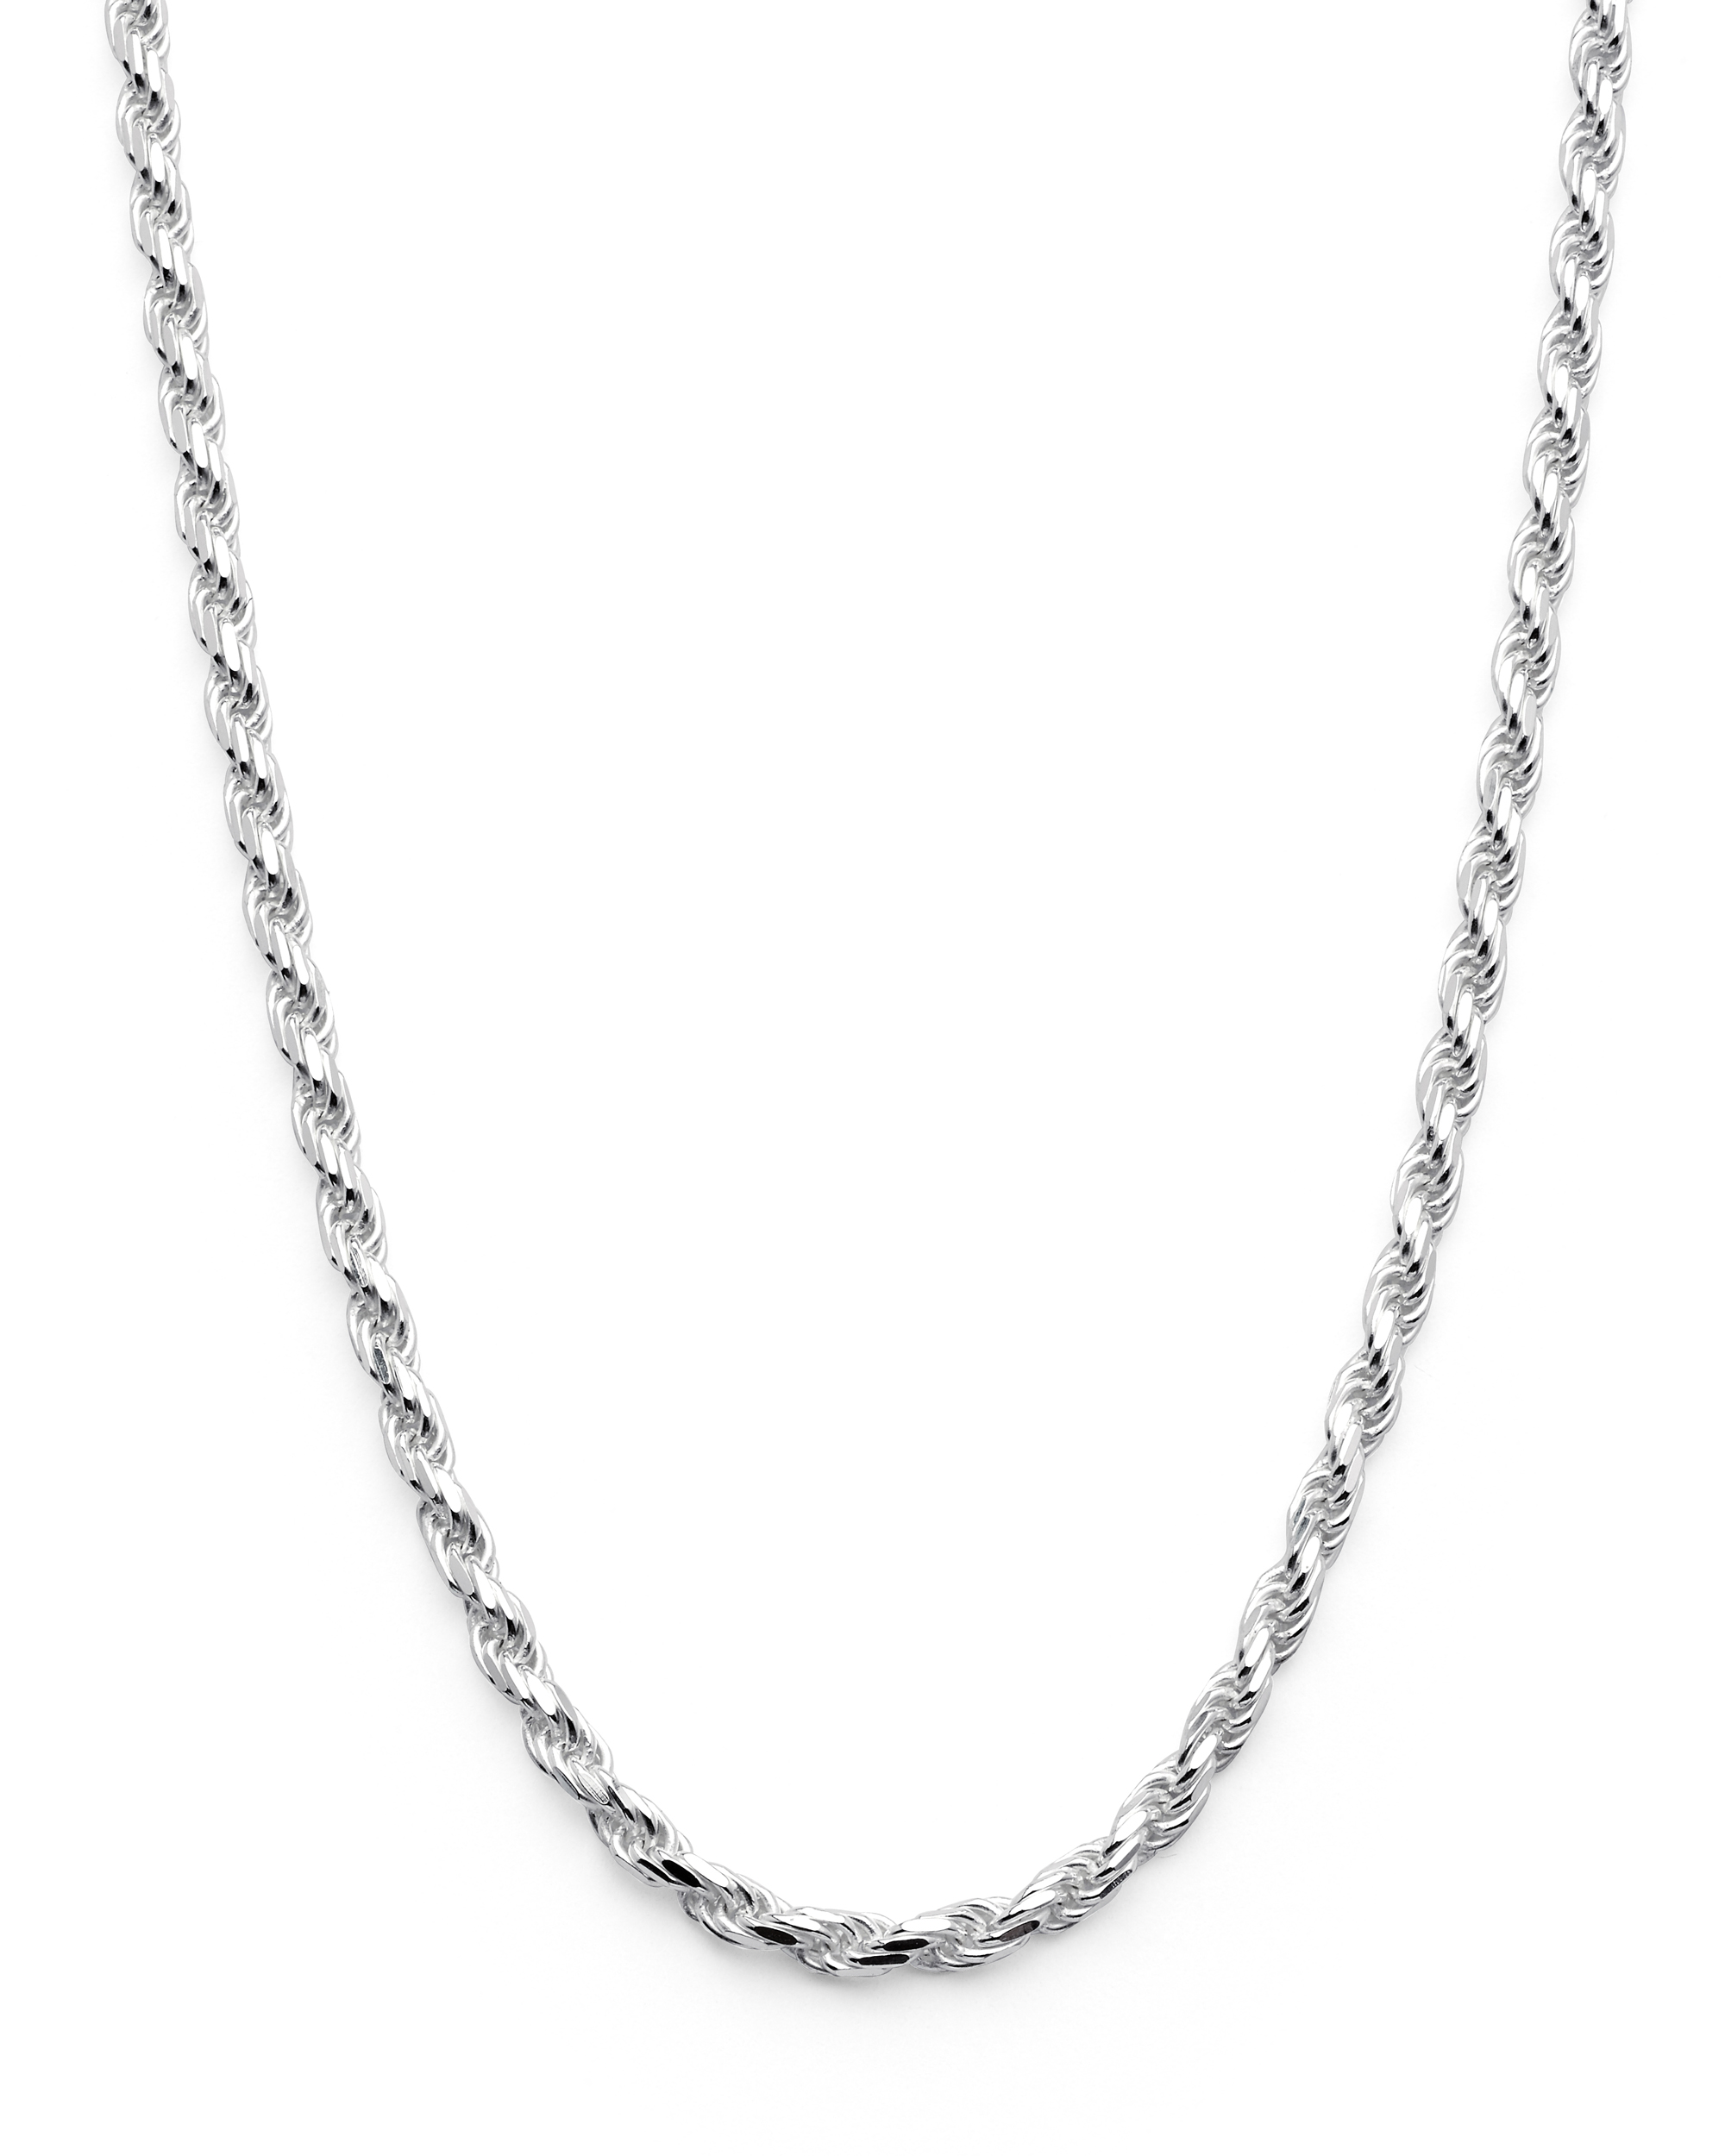 Metal Masters Men's 2.3MM Sterling Silver 925 Italian Rope Necklace Chain 16" 18" 20" 22" 24" 30" - image 1 of 6